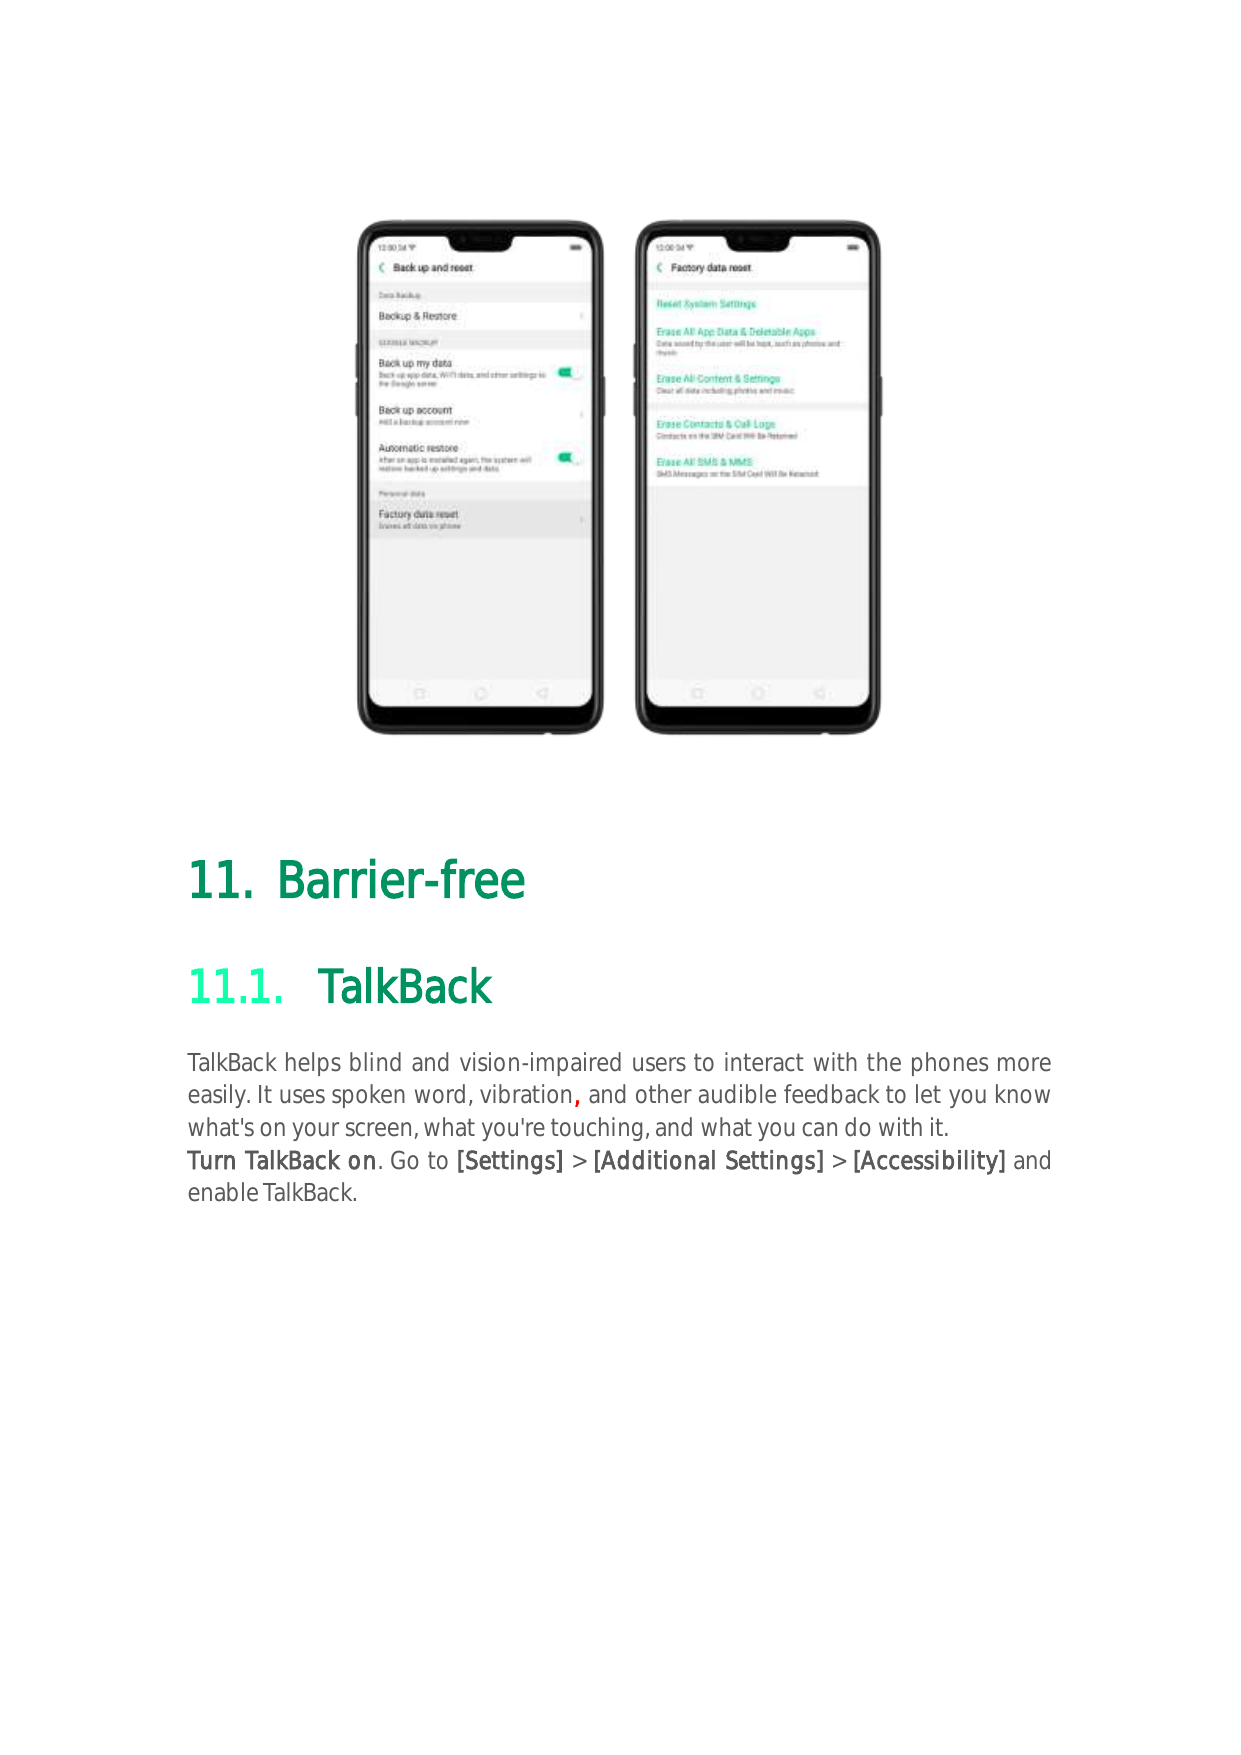 11. Barrier-free11.1. TalkBackTalkBack helps blind and vision-impaired users to interact with the phones moreeasily. It uses spo